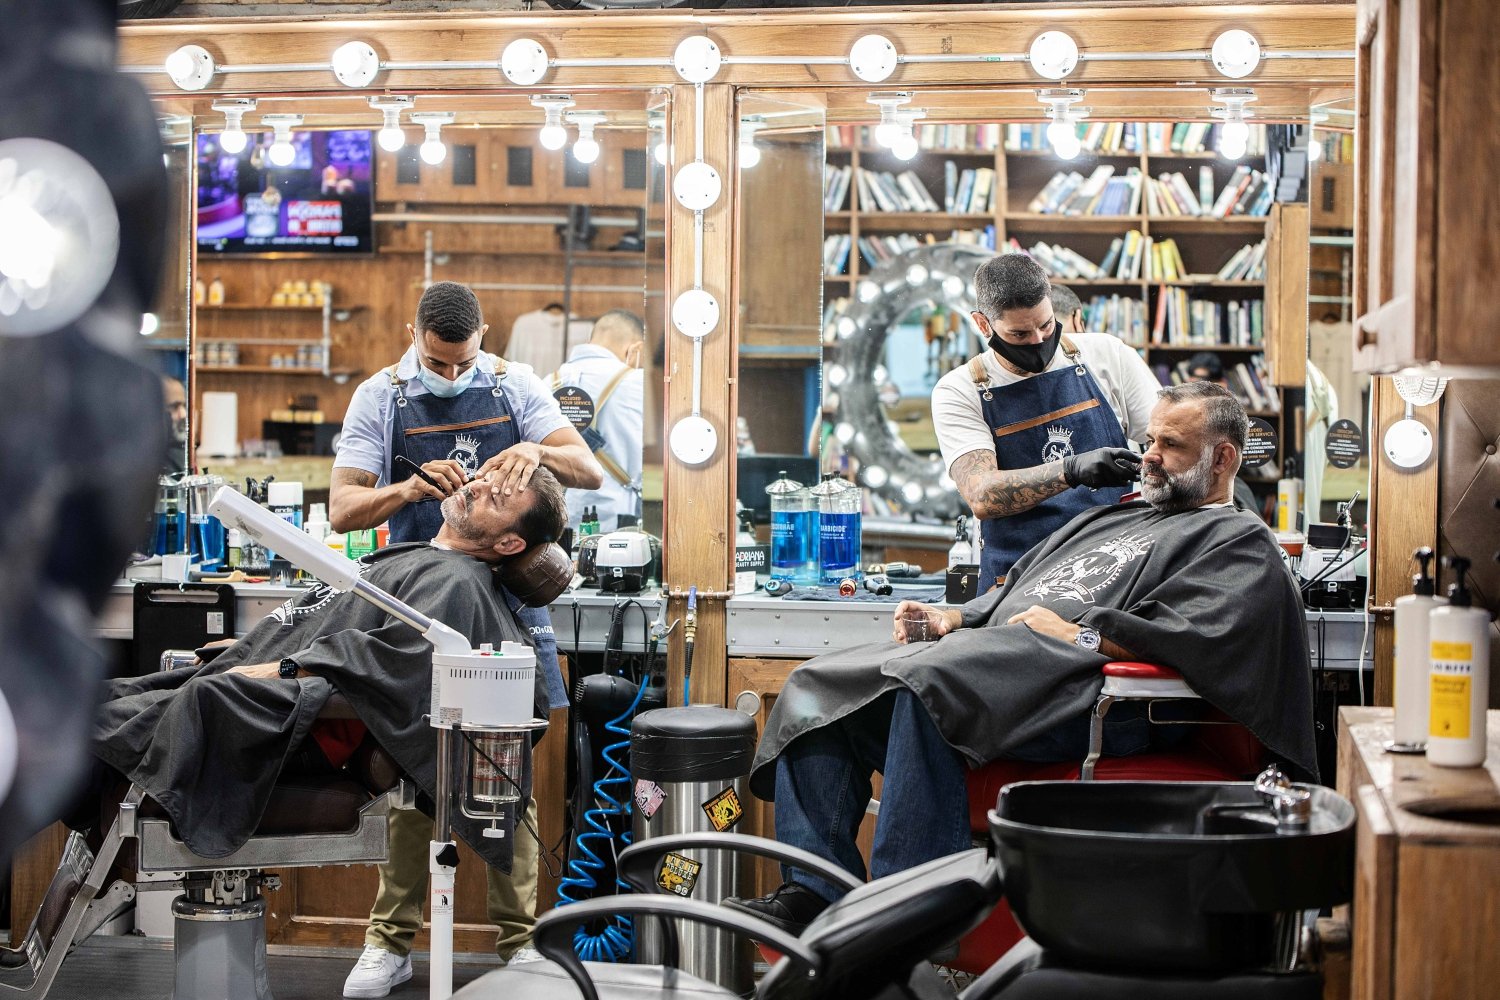 A person getting a haircut in a barber shop

Description automatically generated